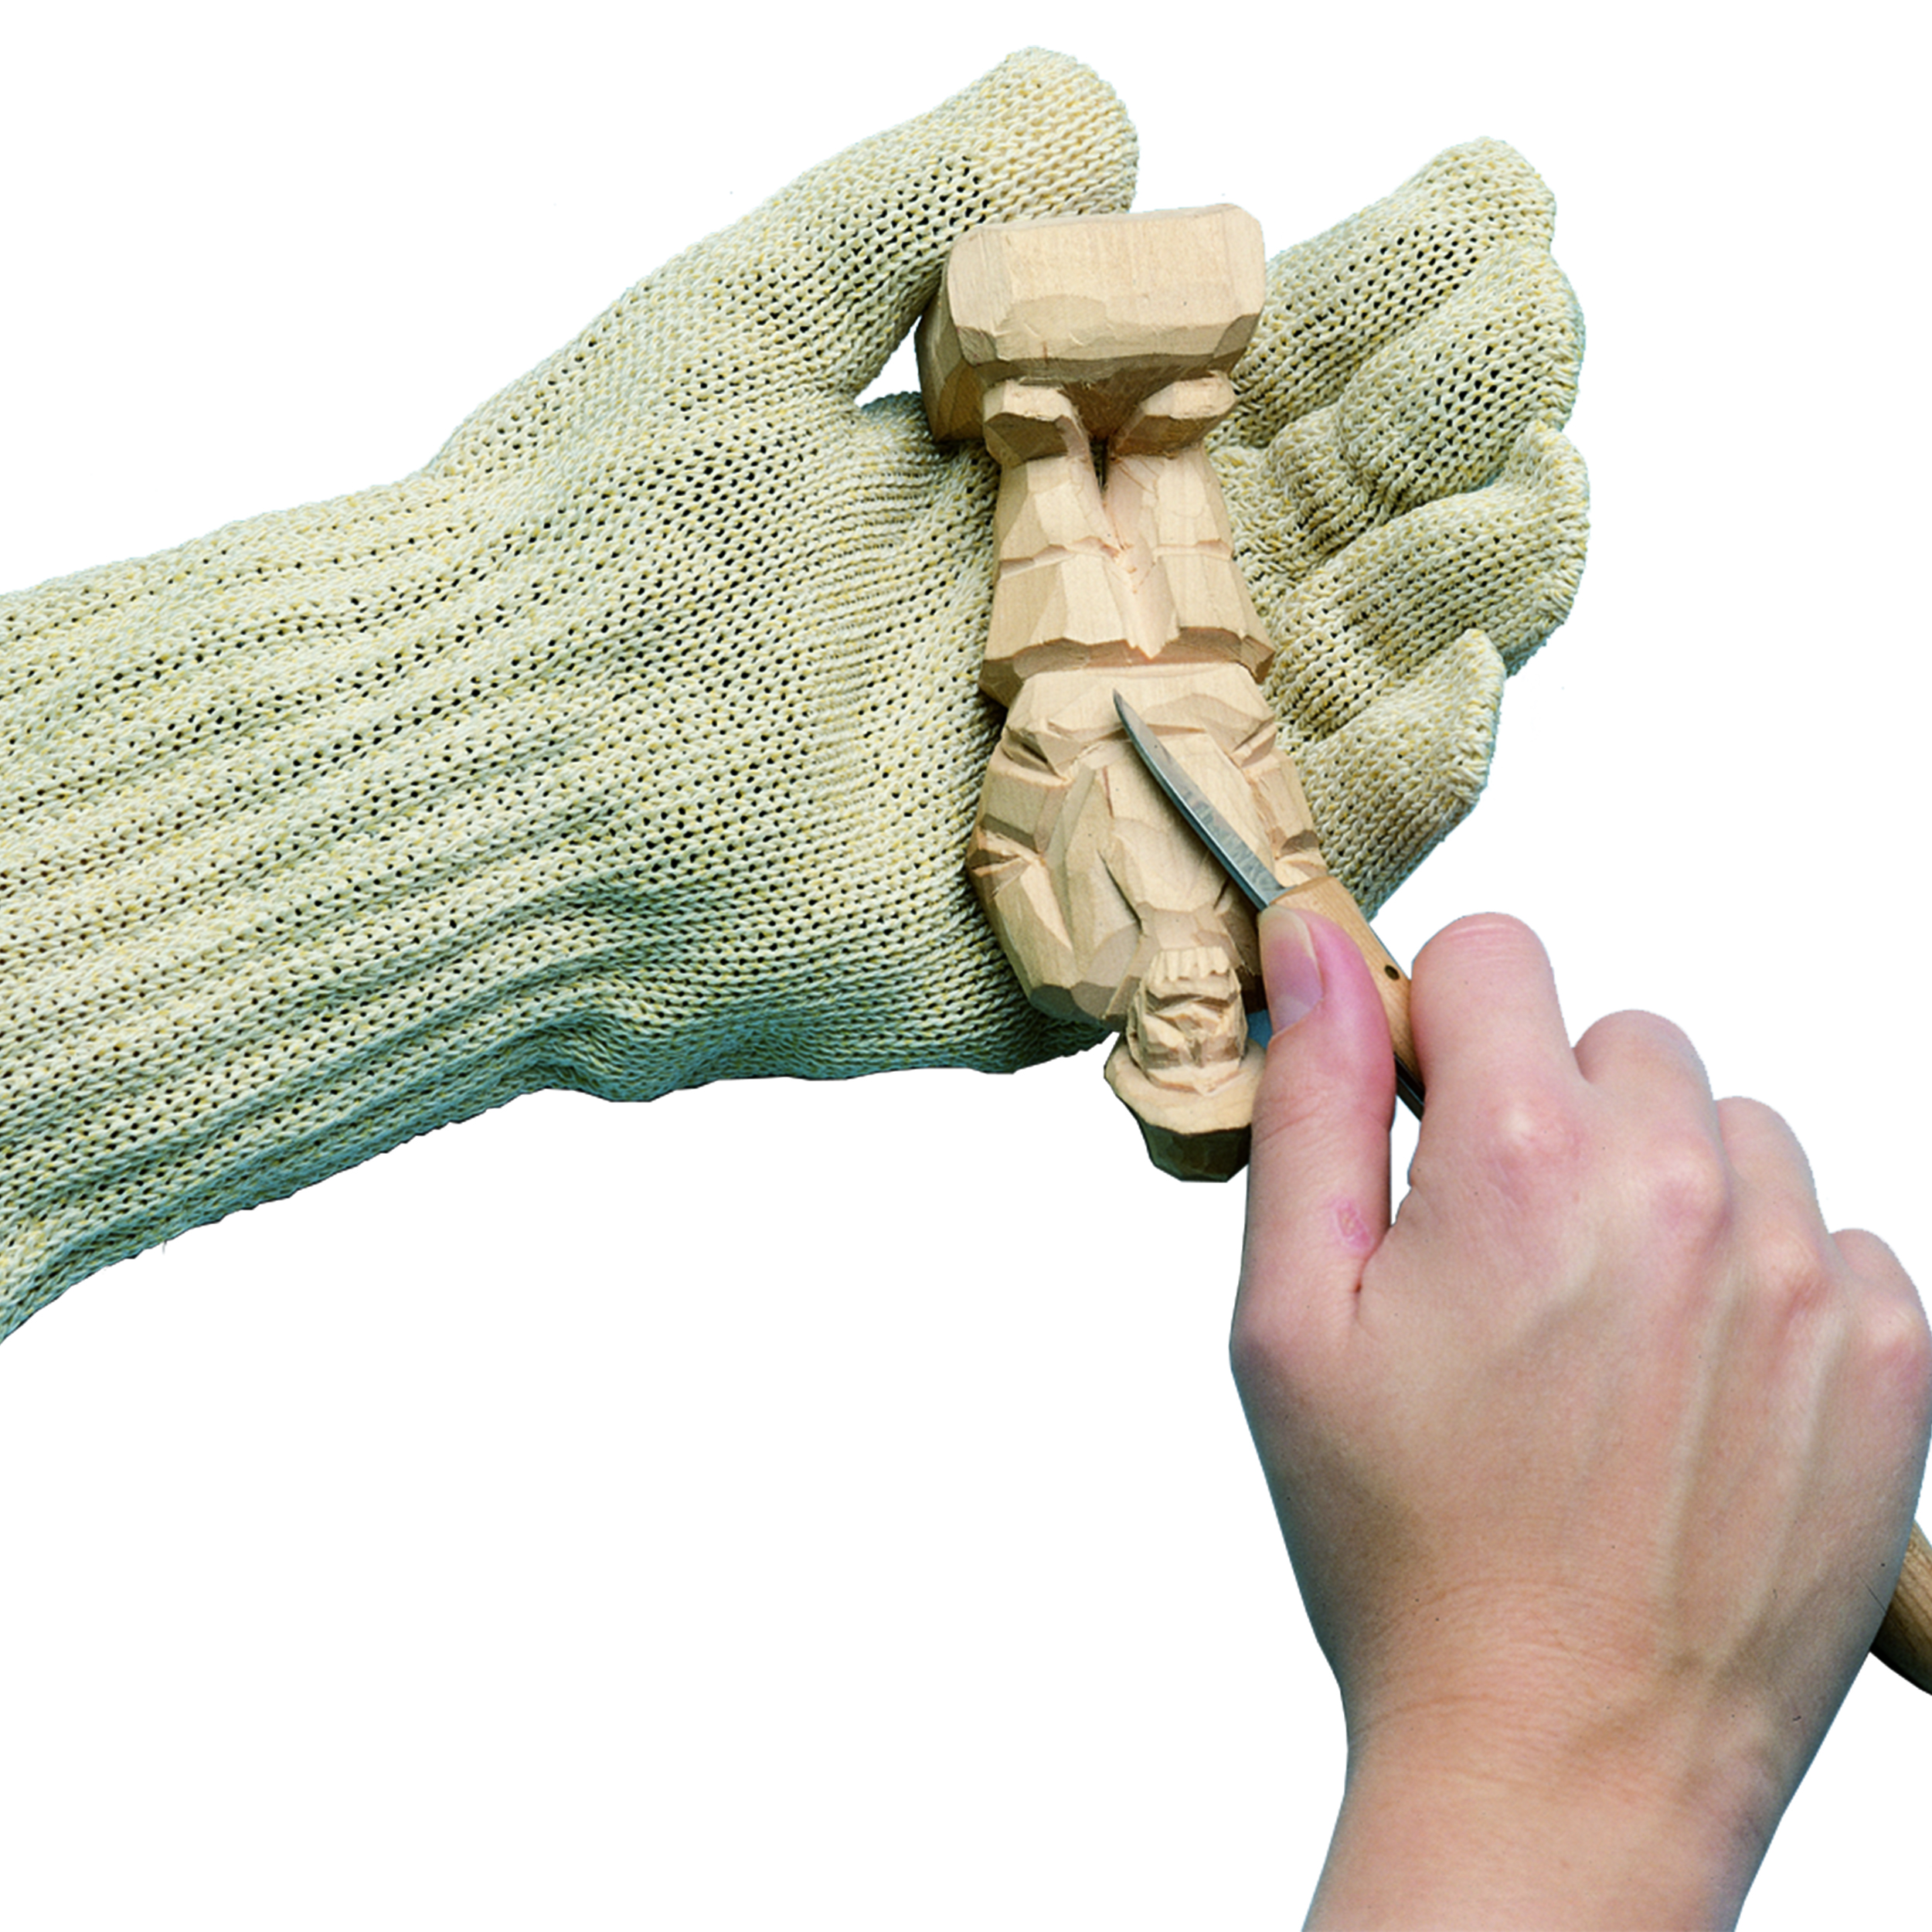 Safety Glove, Small, Size 5-6